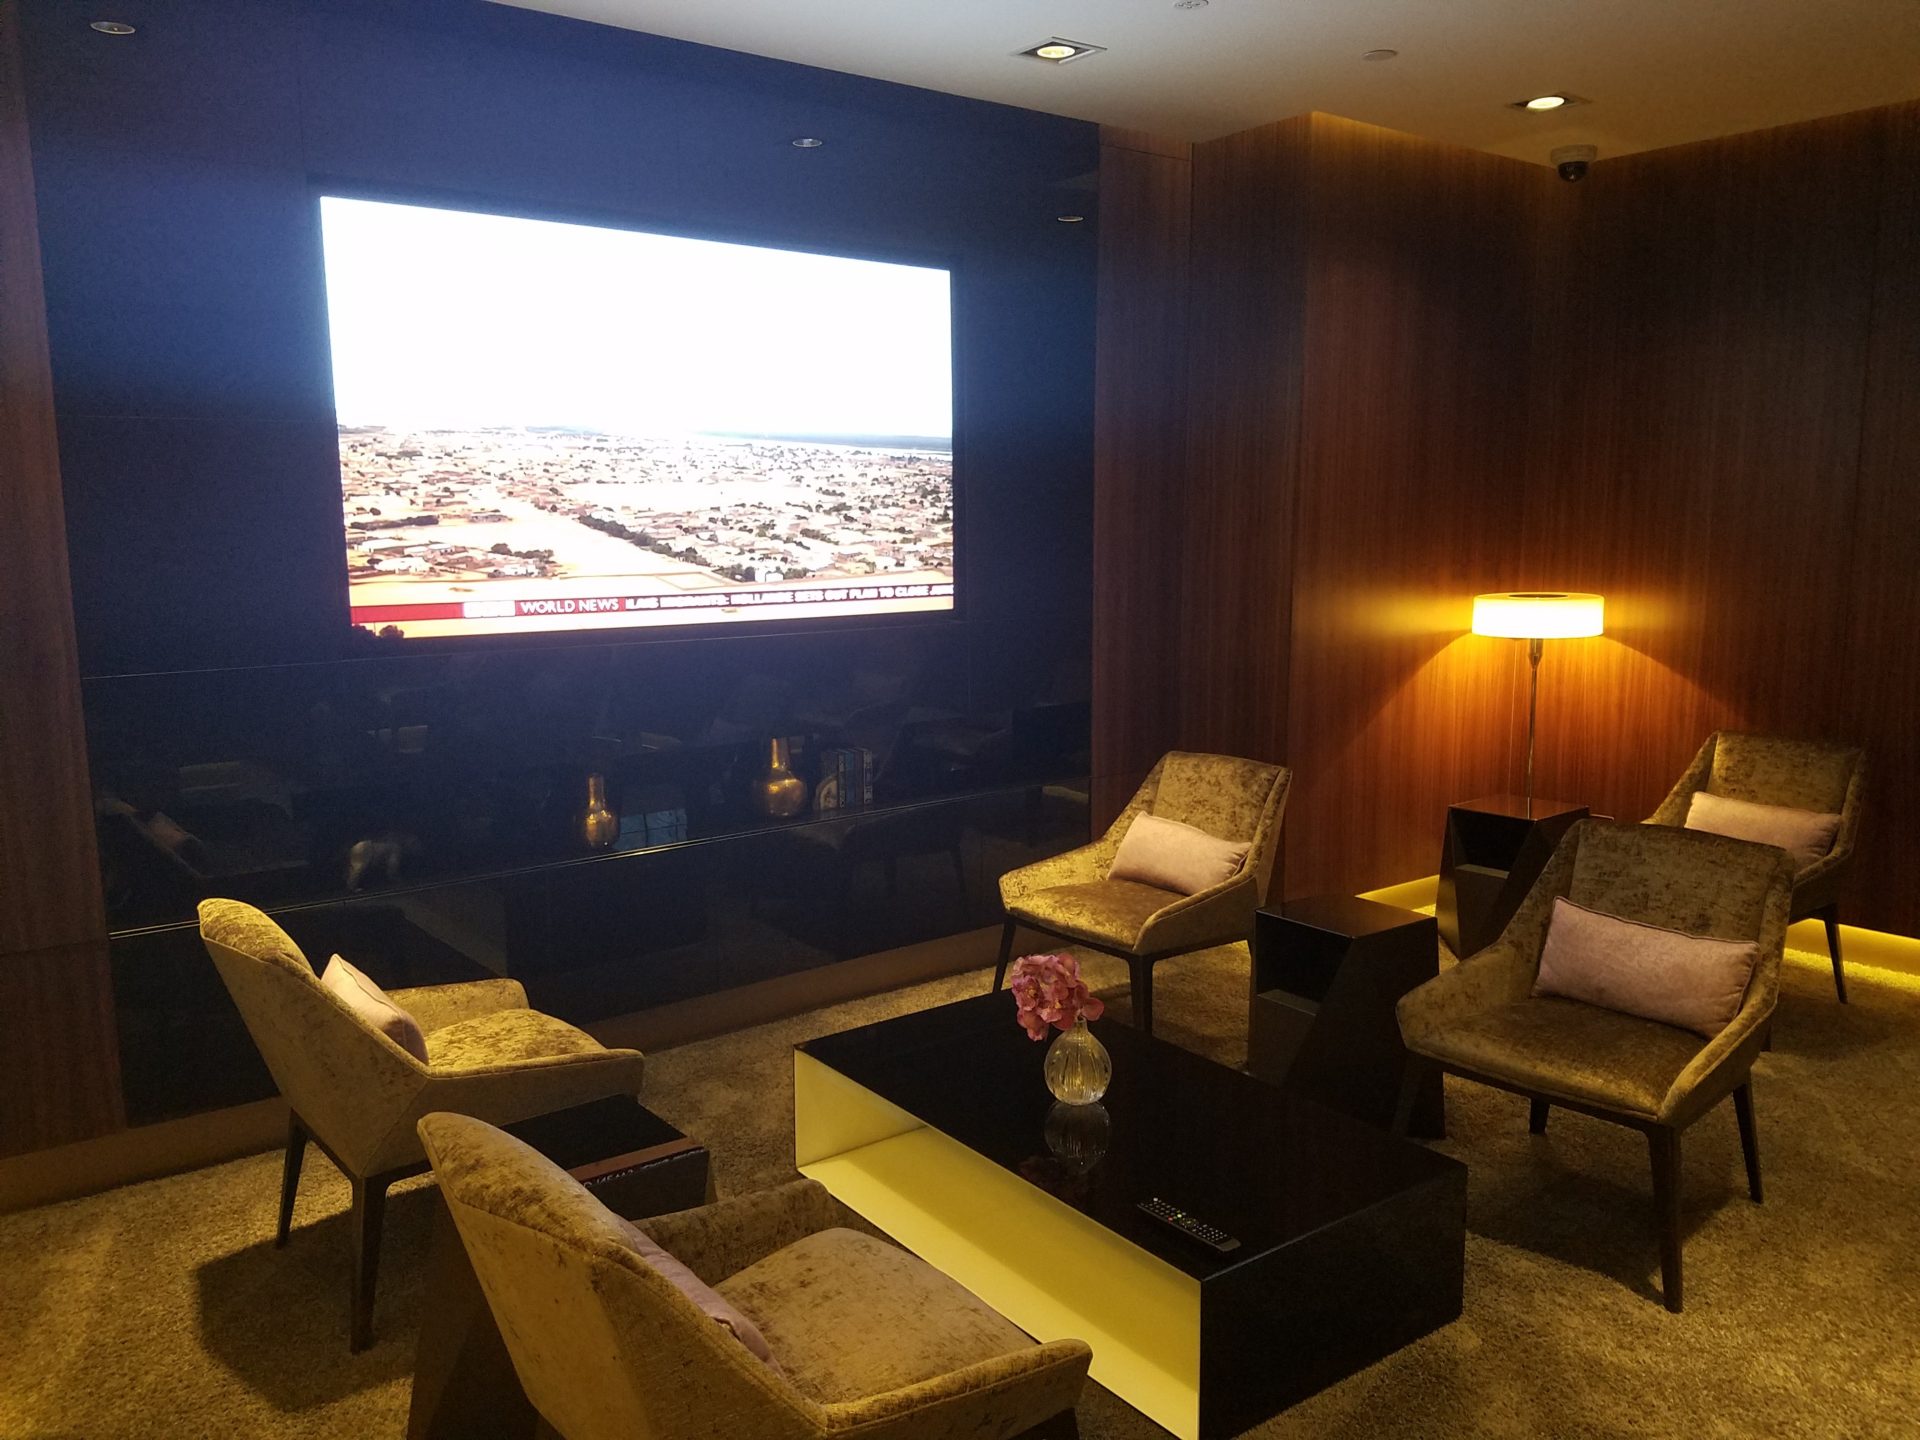 a room with a large screen